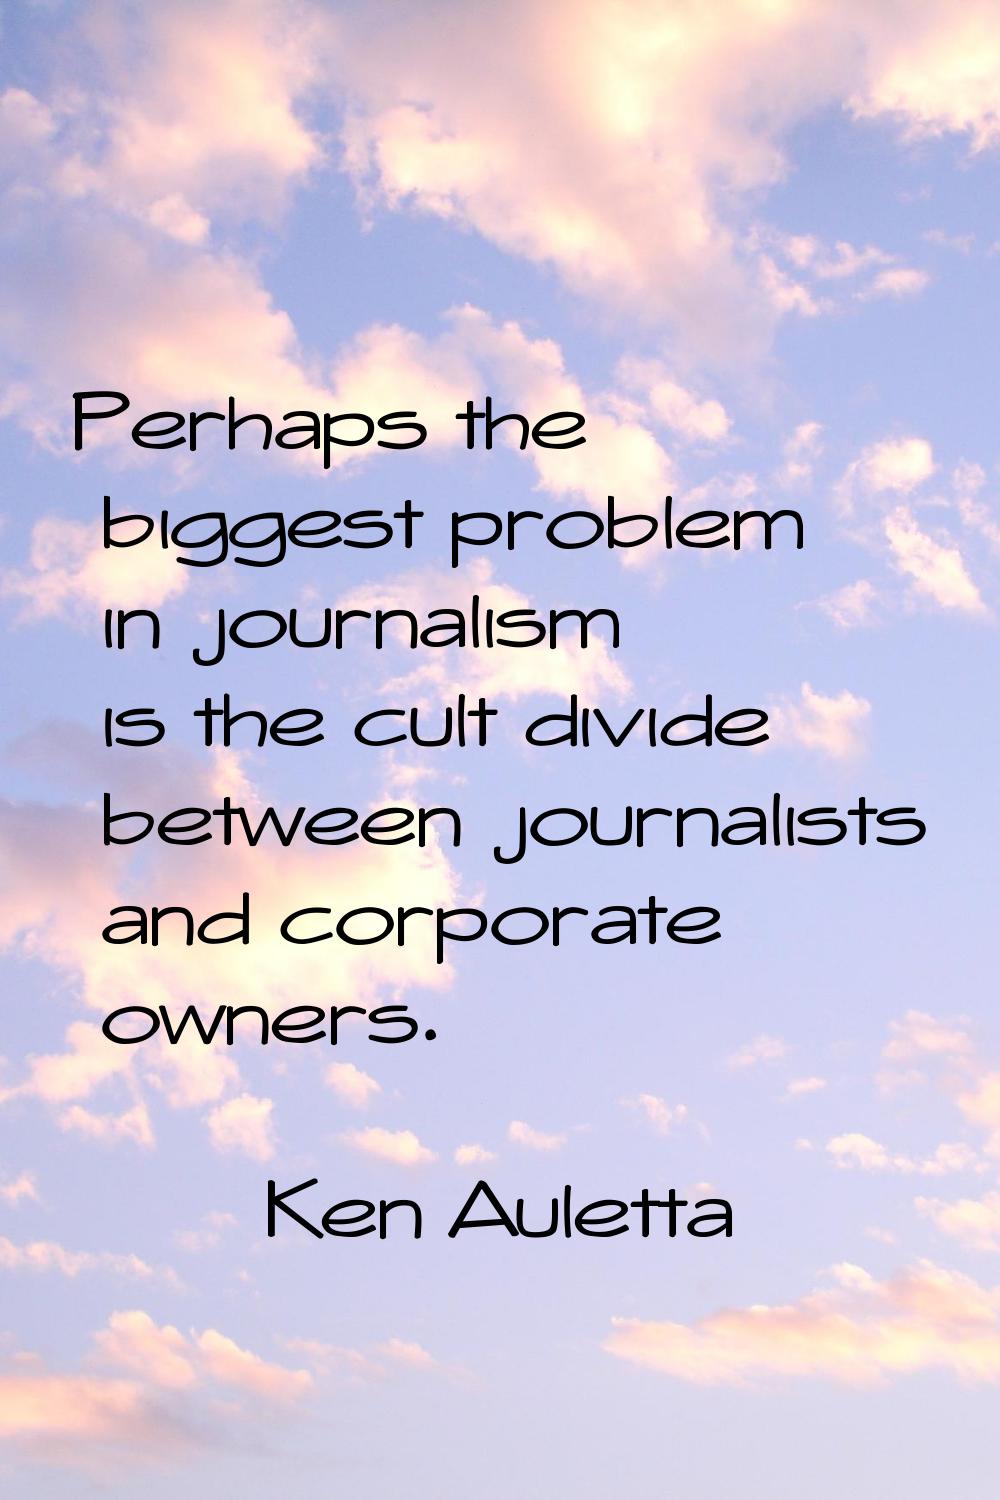 Perhaps the biggest problem in journalism is the cult divide between journalists and corporate owne